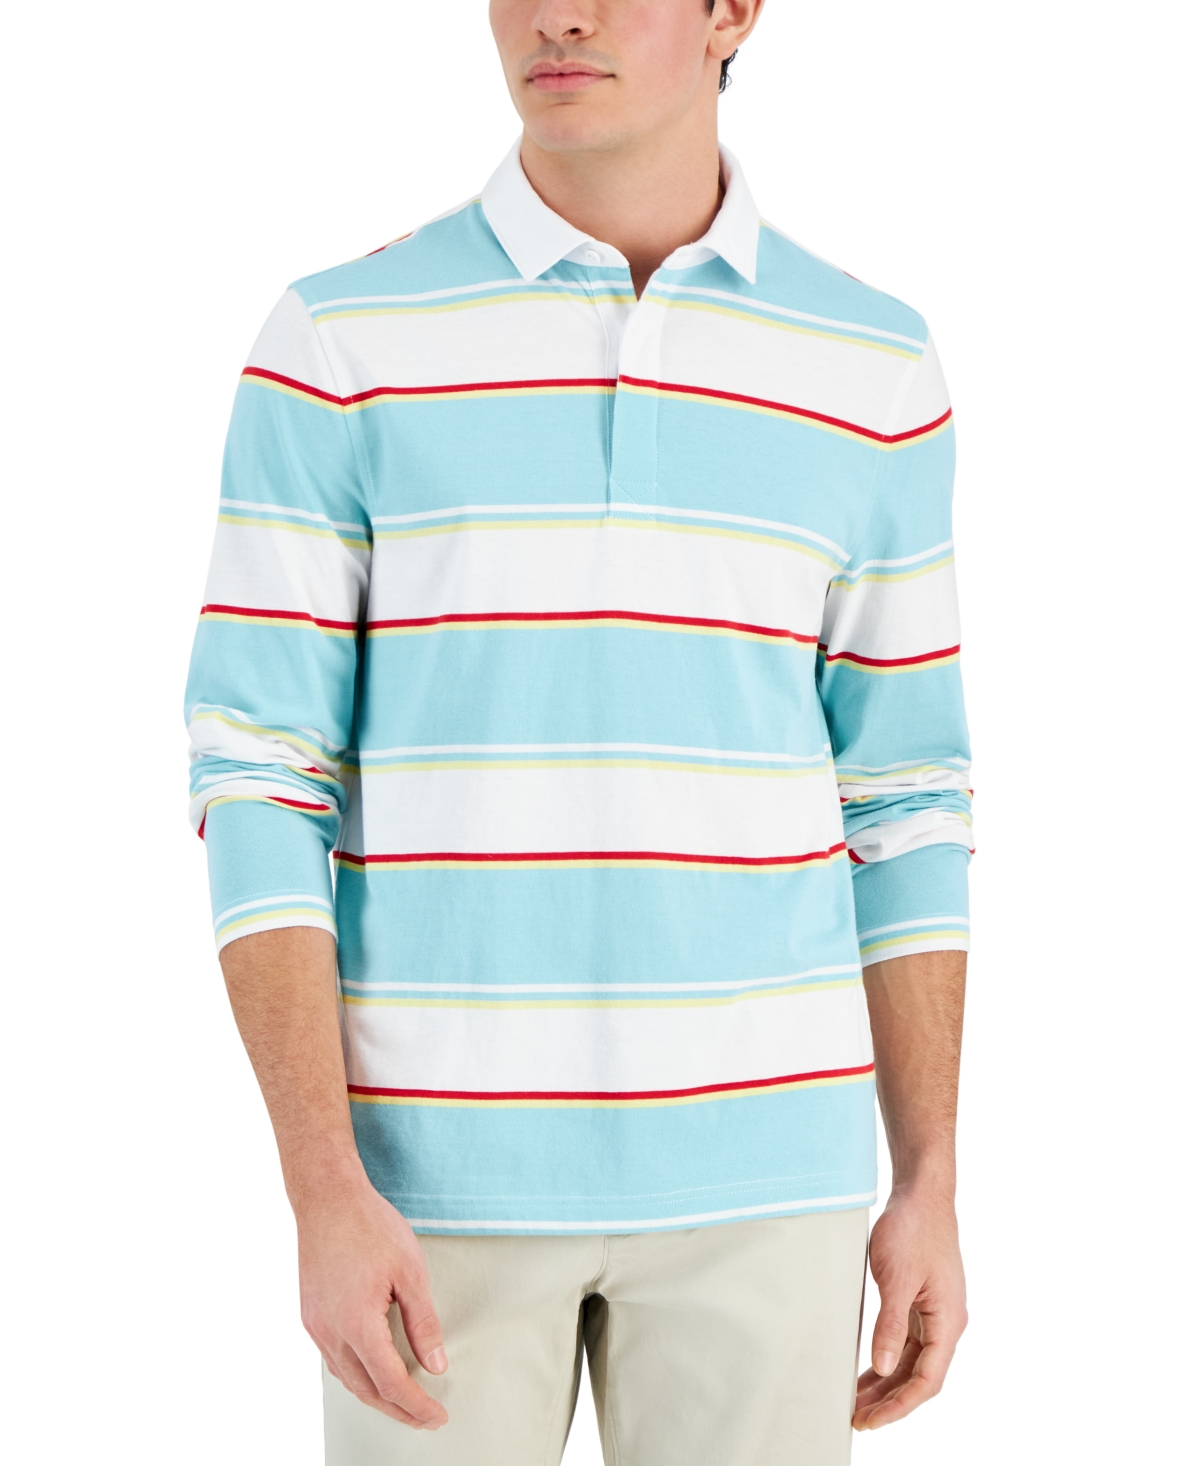 Men's Striped Long Sleeve Rugby Shirt, Created for Macy's - Aqua Reef